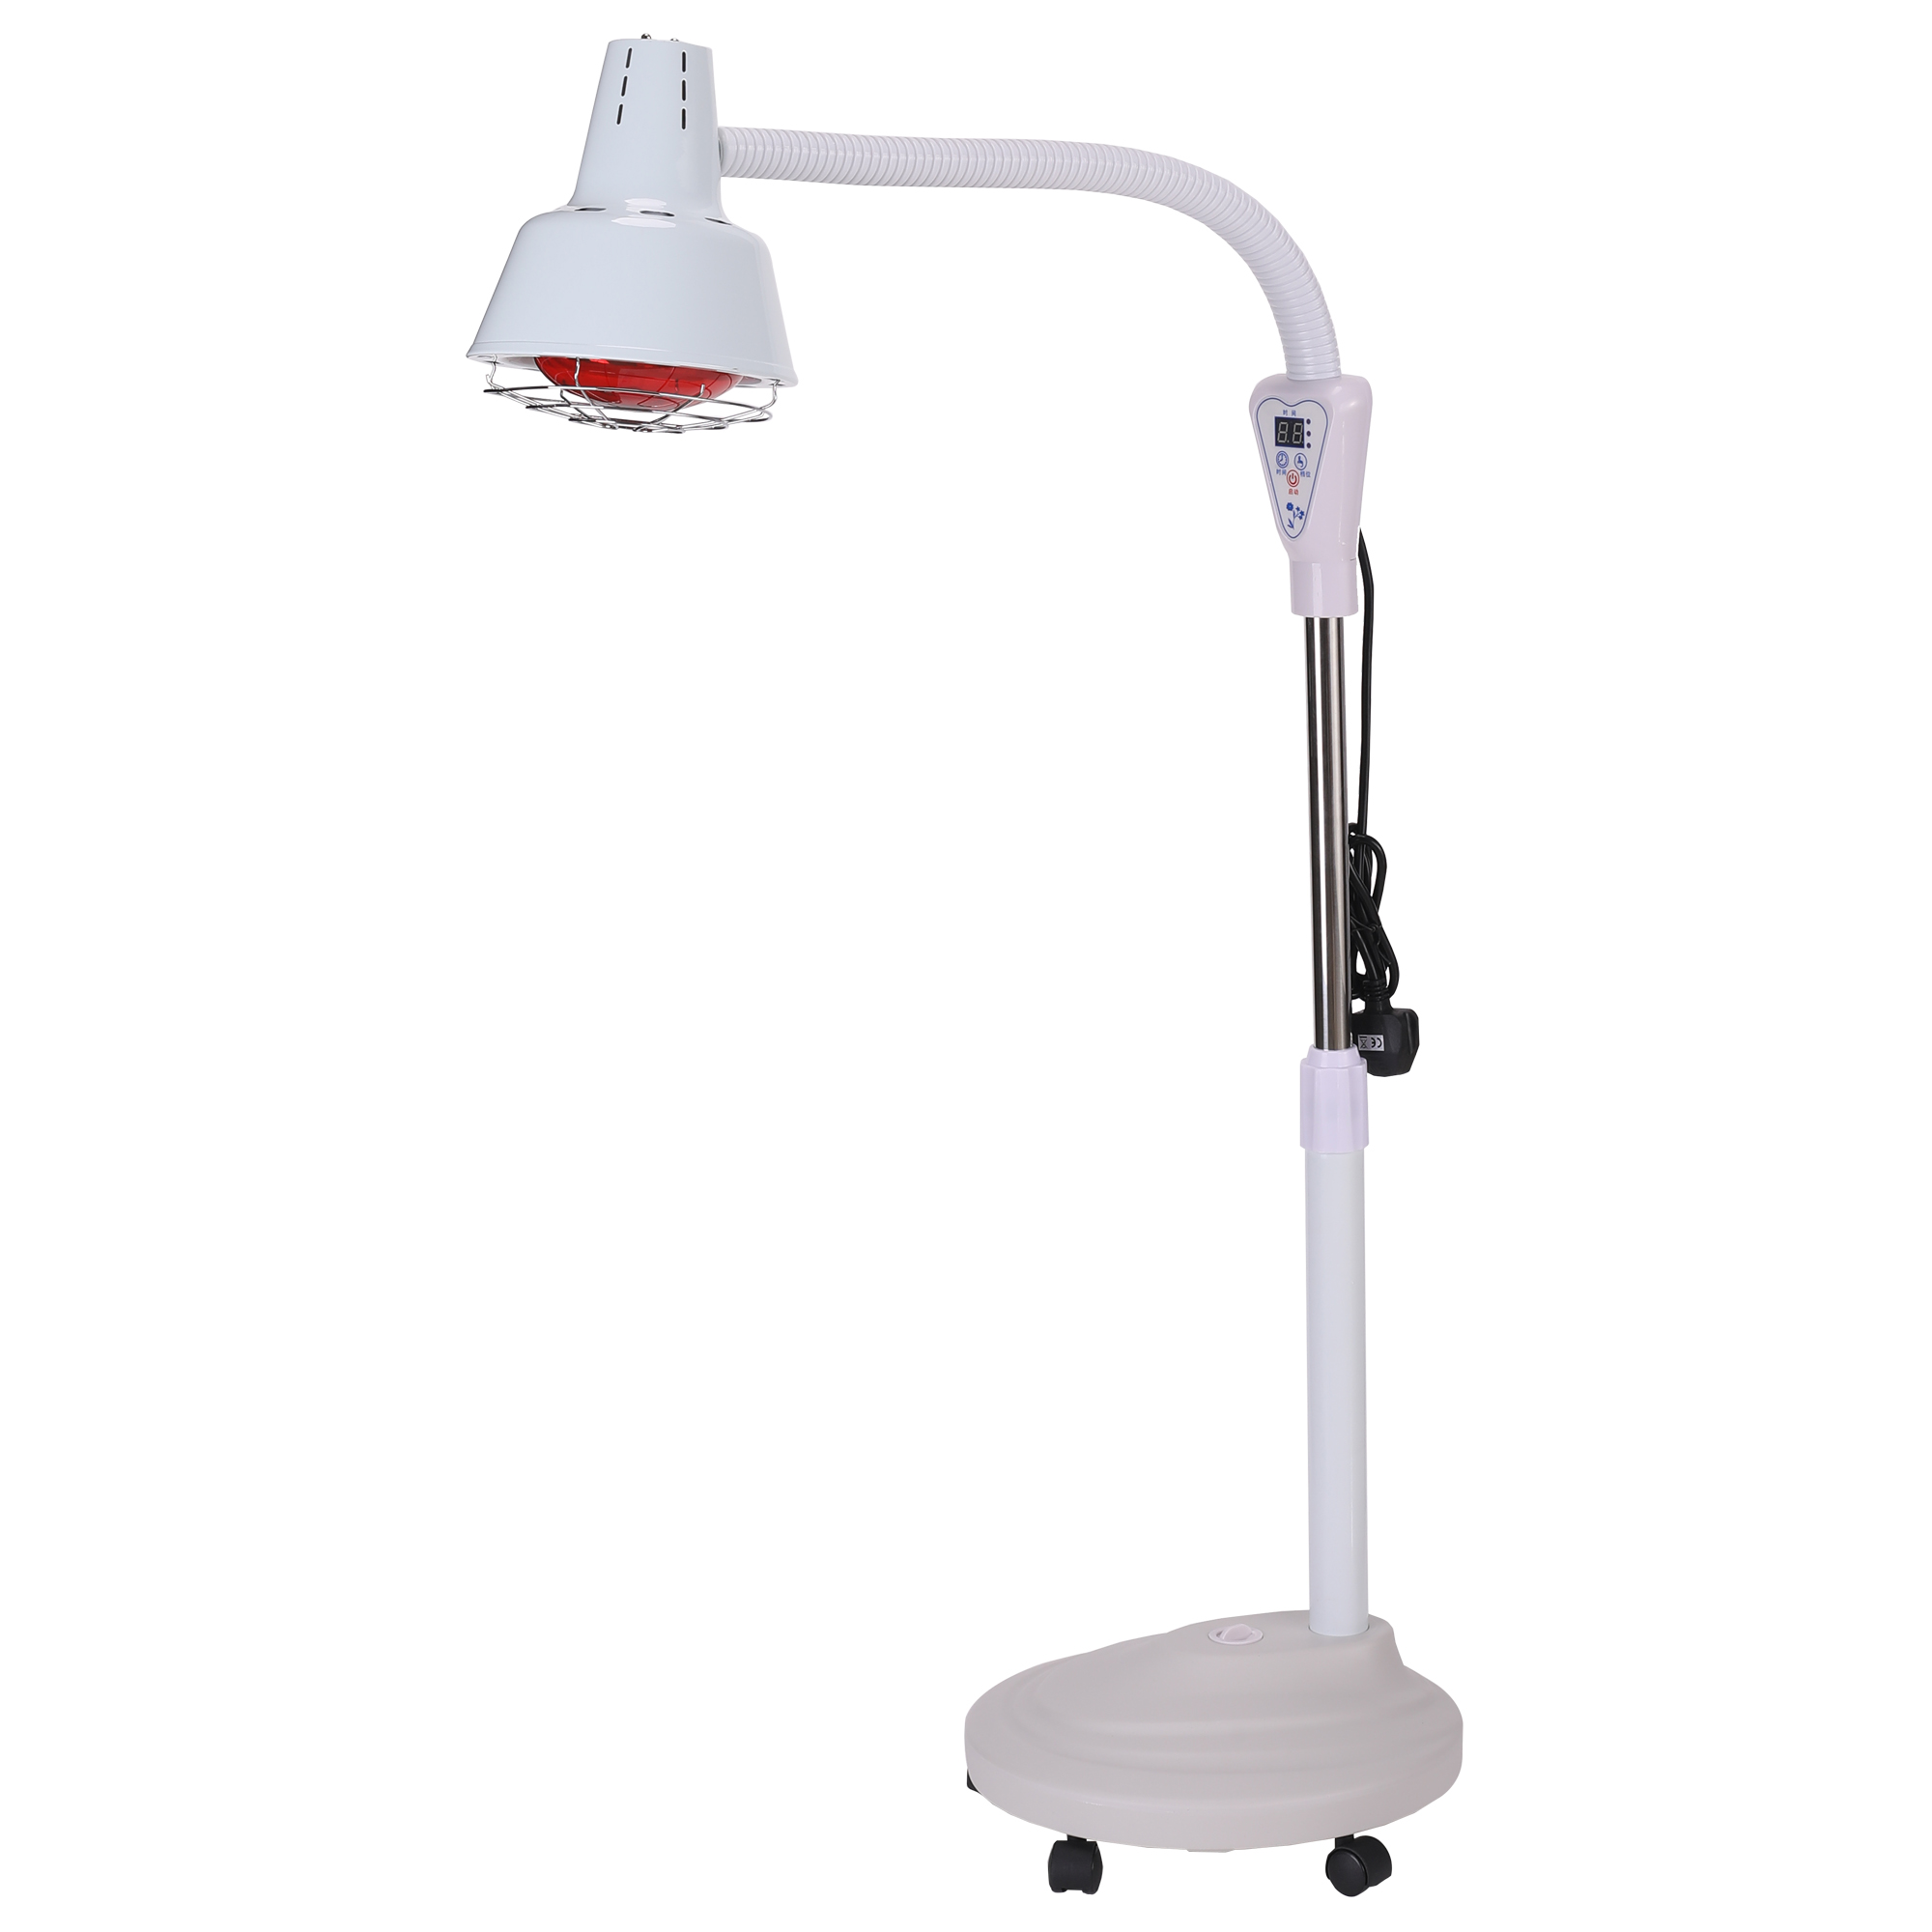 Ir Lamp Physiotherapy | vlr.eng.br